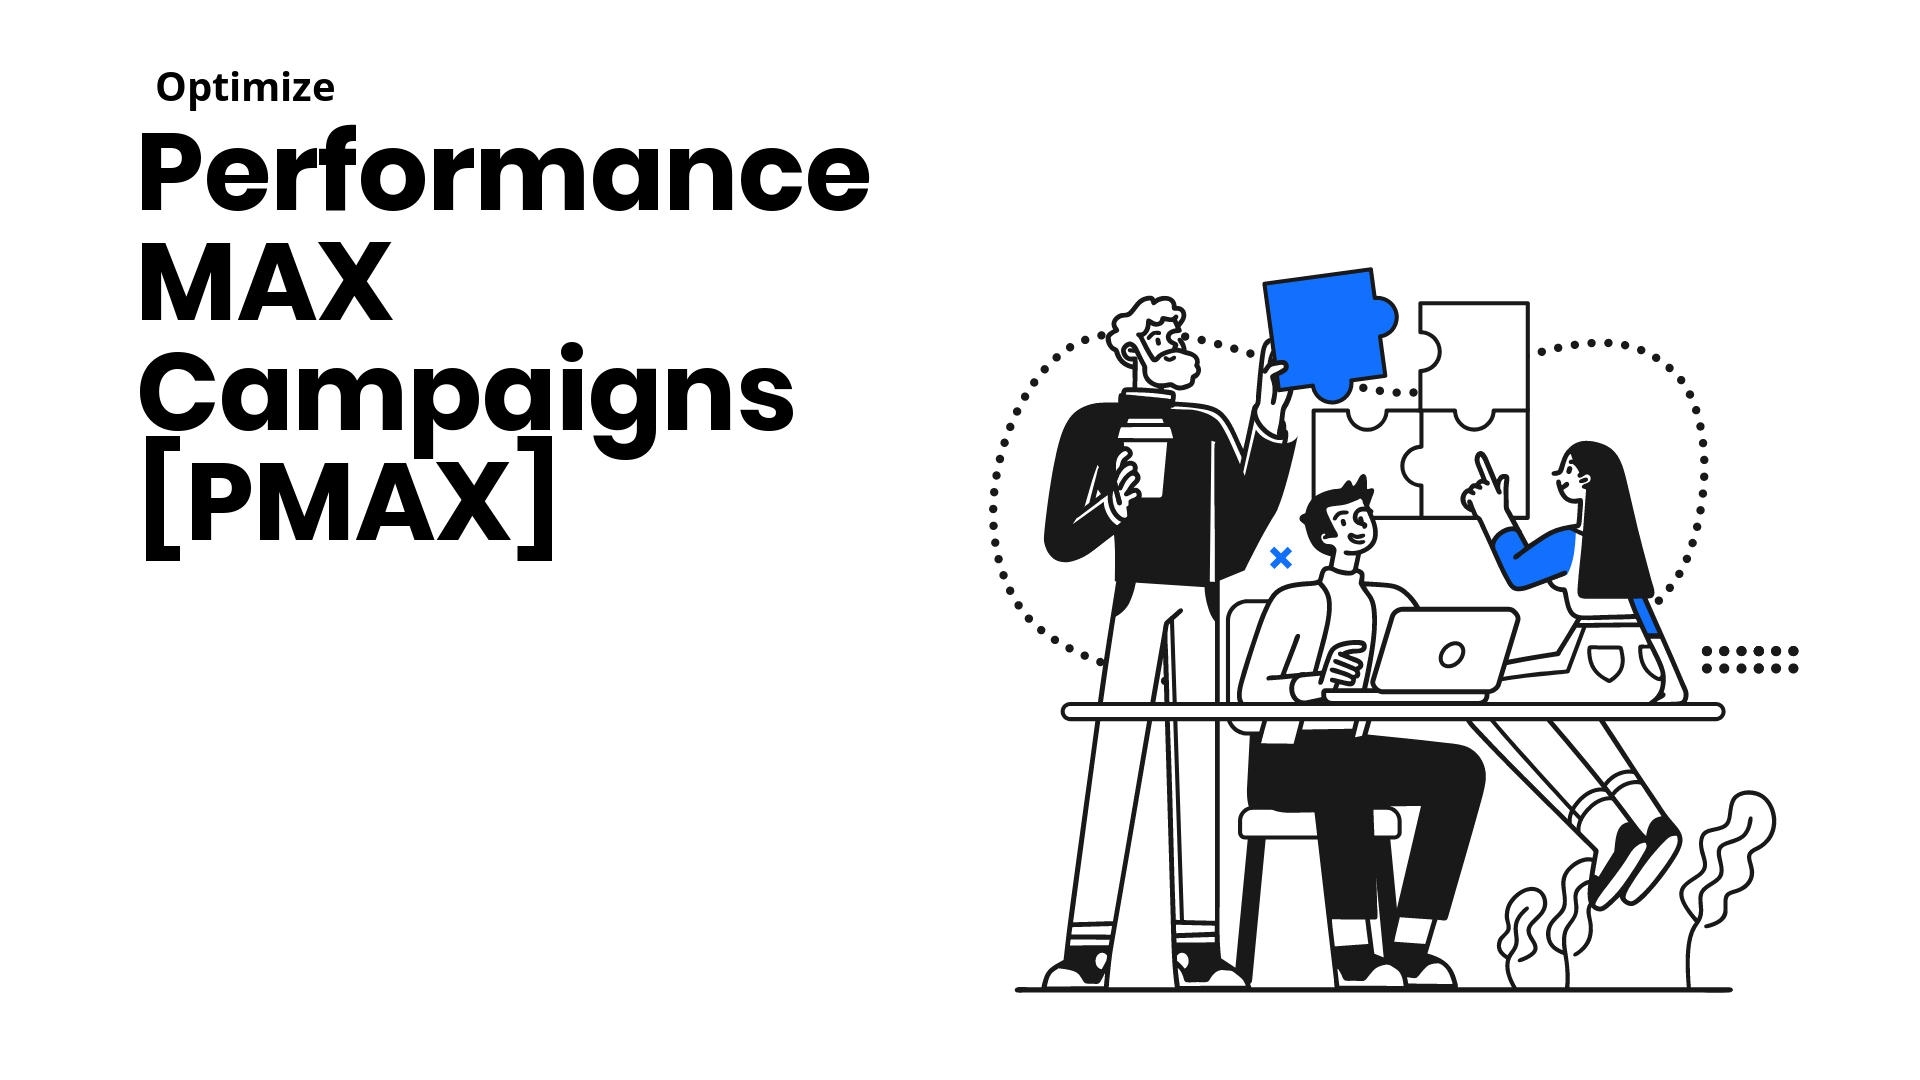 How to improve Performance Max Campaigns